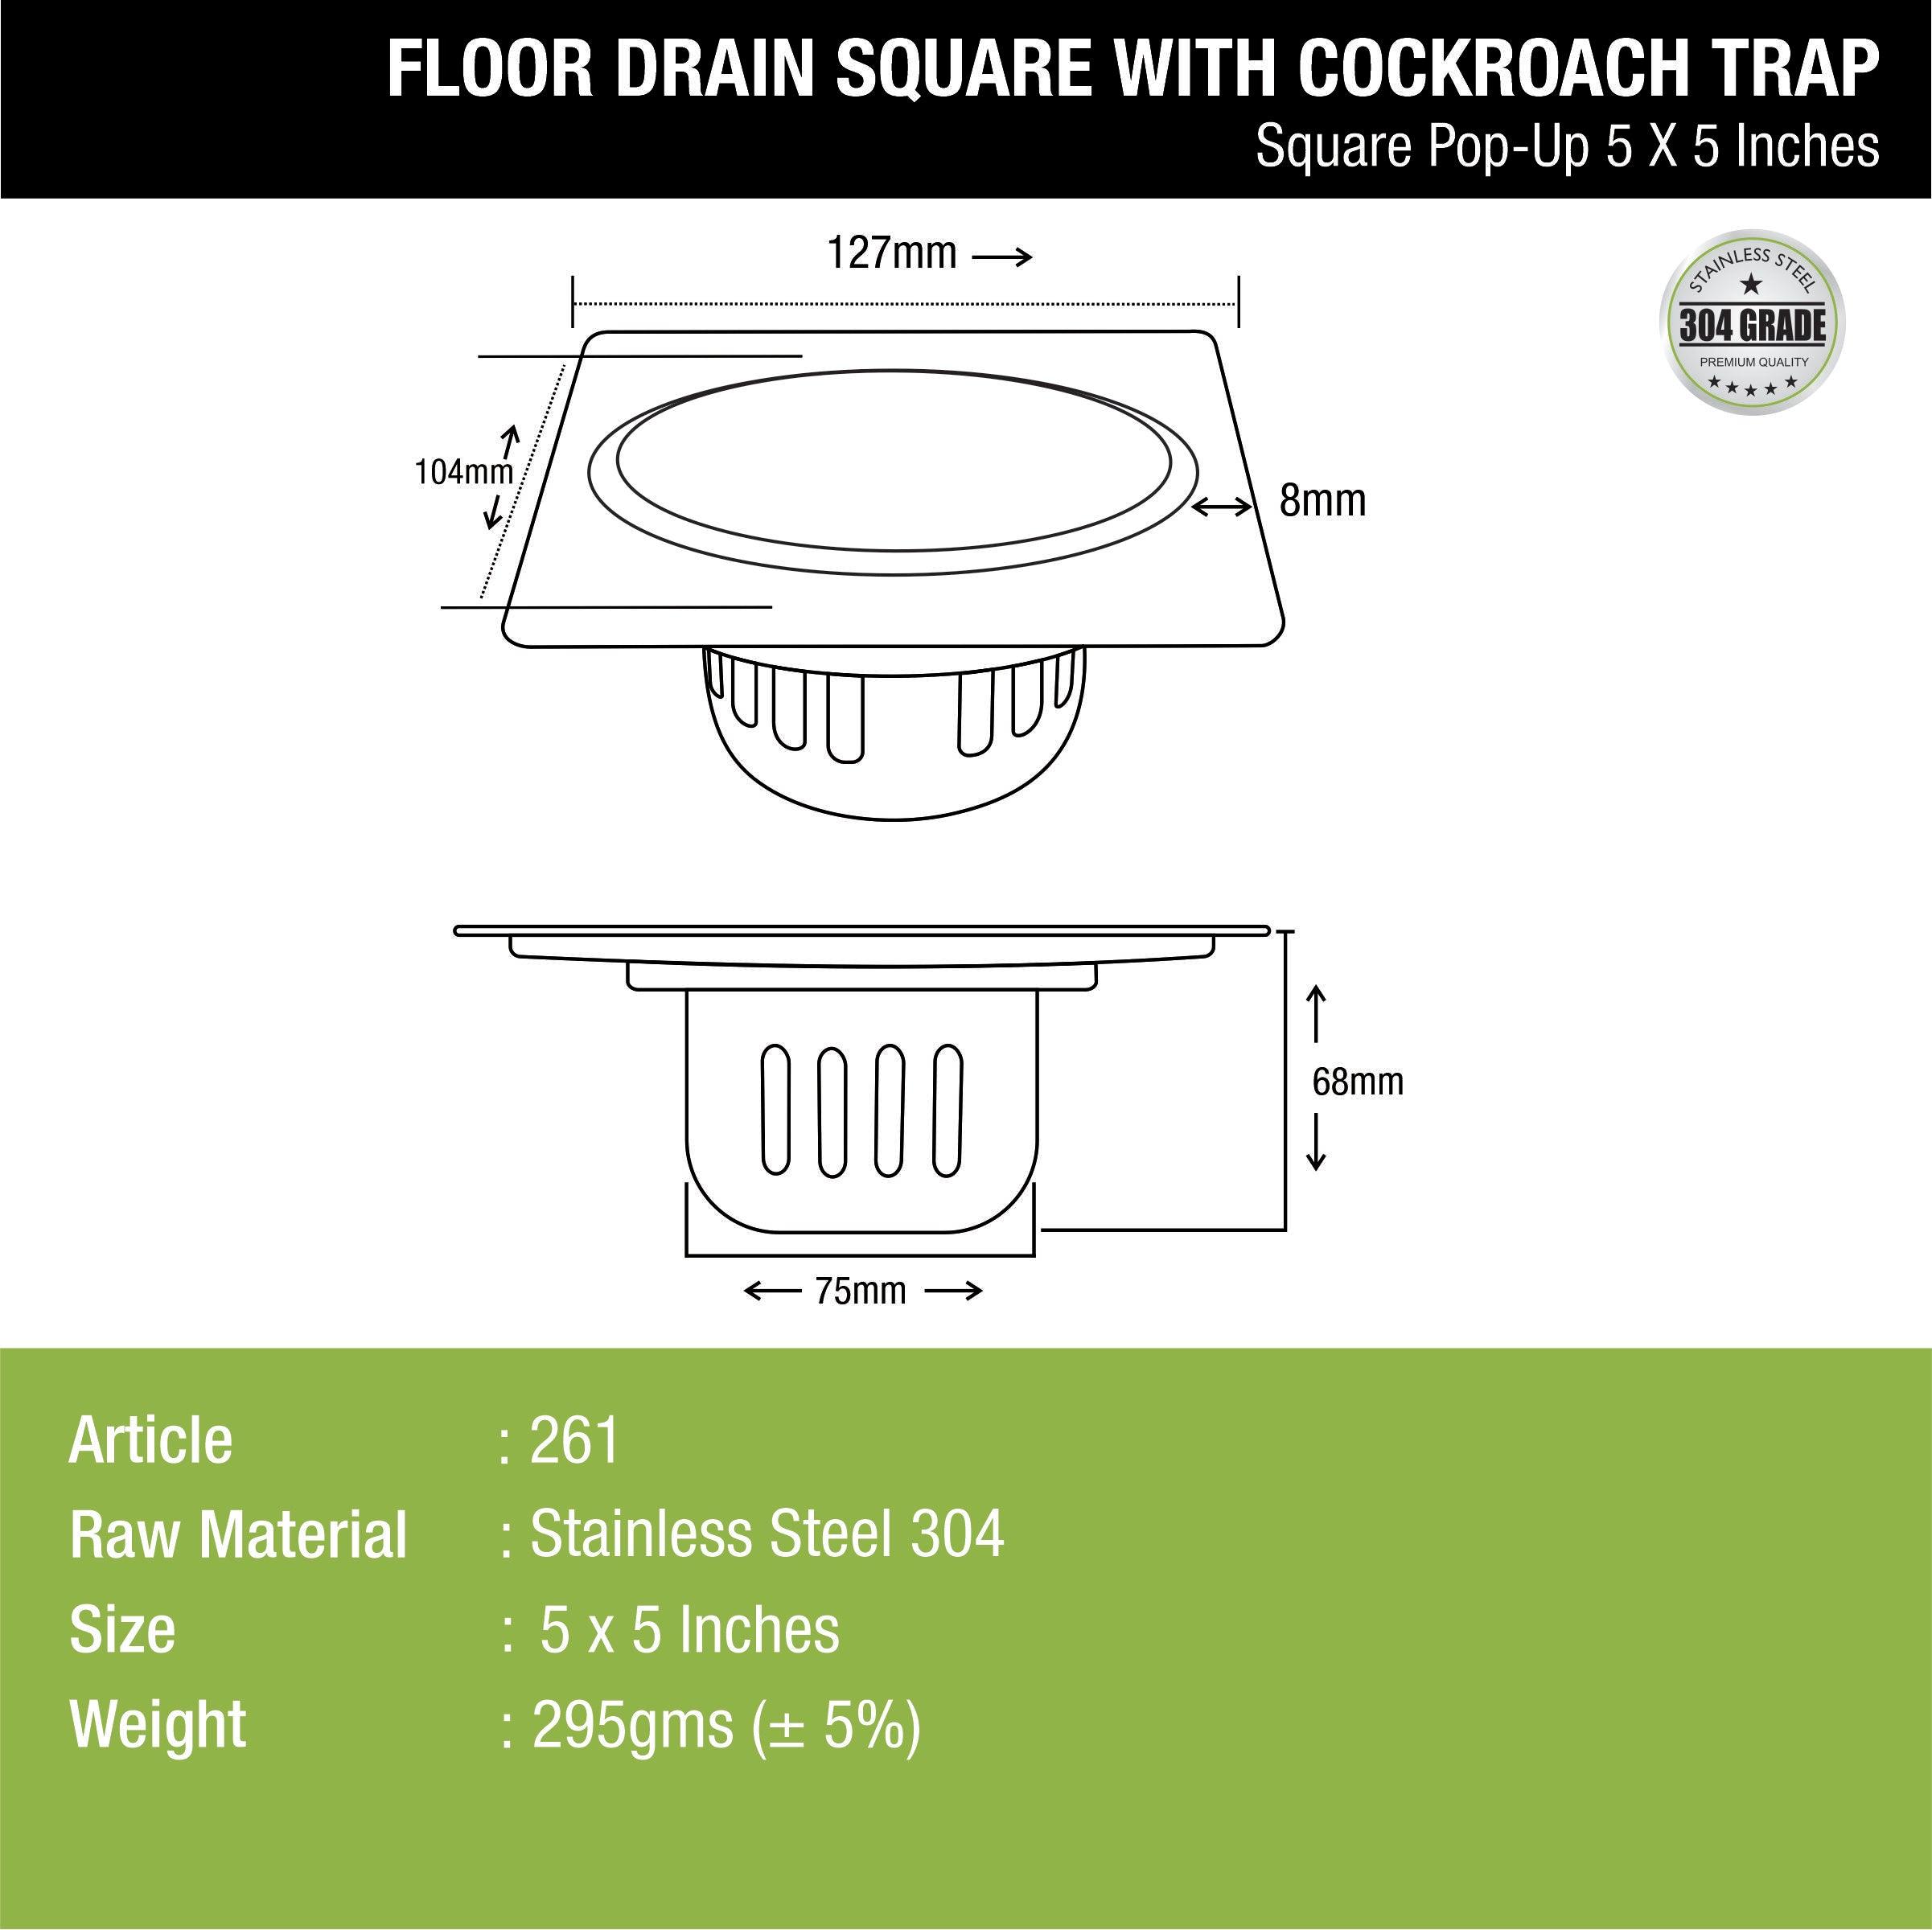 Pop-up Square Floor Drain (5 x 5 Inches) with Cockroach Trap - LIPKA - Lipka Home